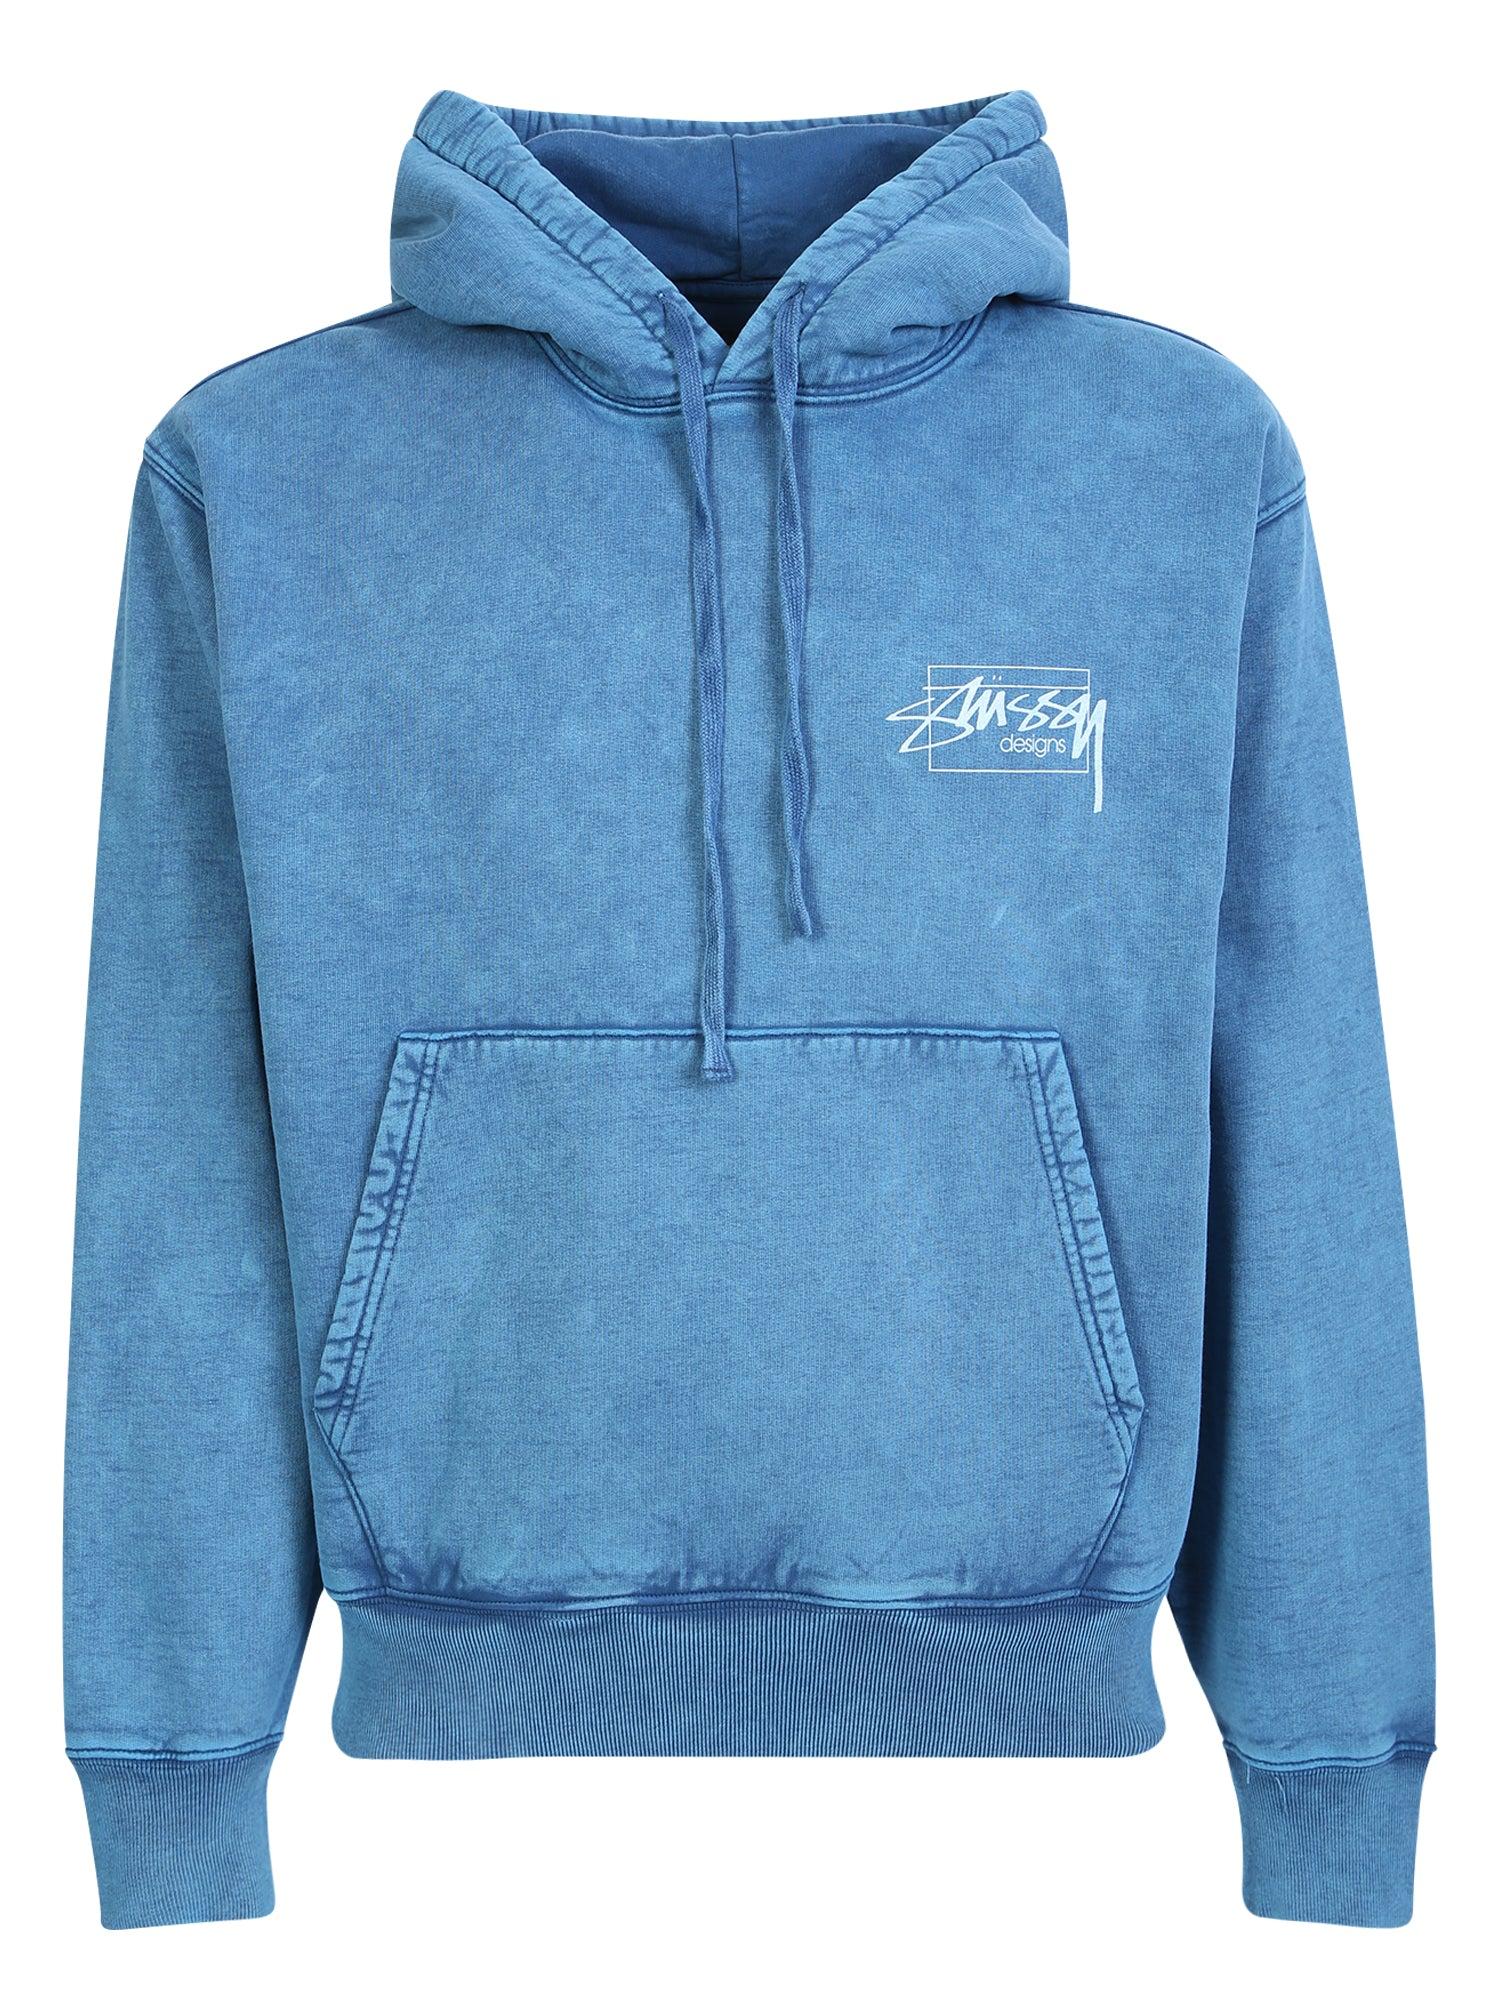 Stussy Stüssy Hooded Sweatshirt With Distressed Effect in Blue for Men ...